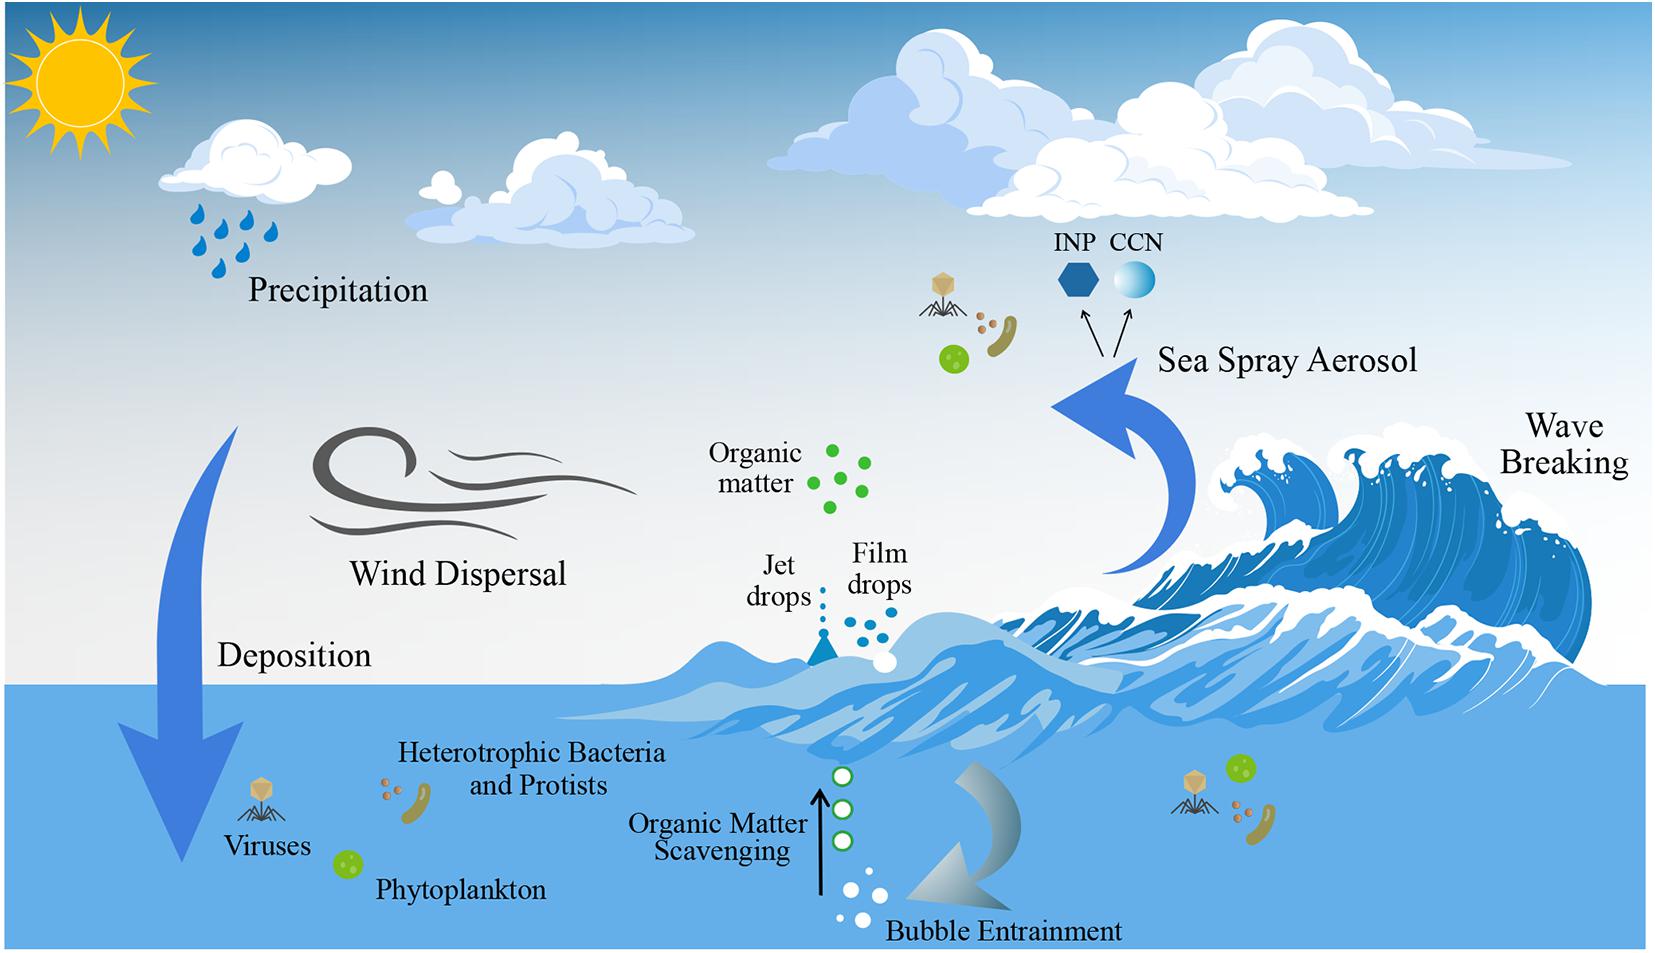 Processes associated with generating sea spray